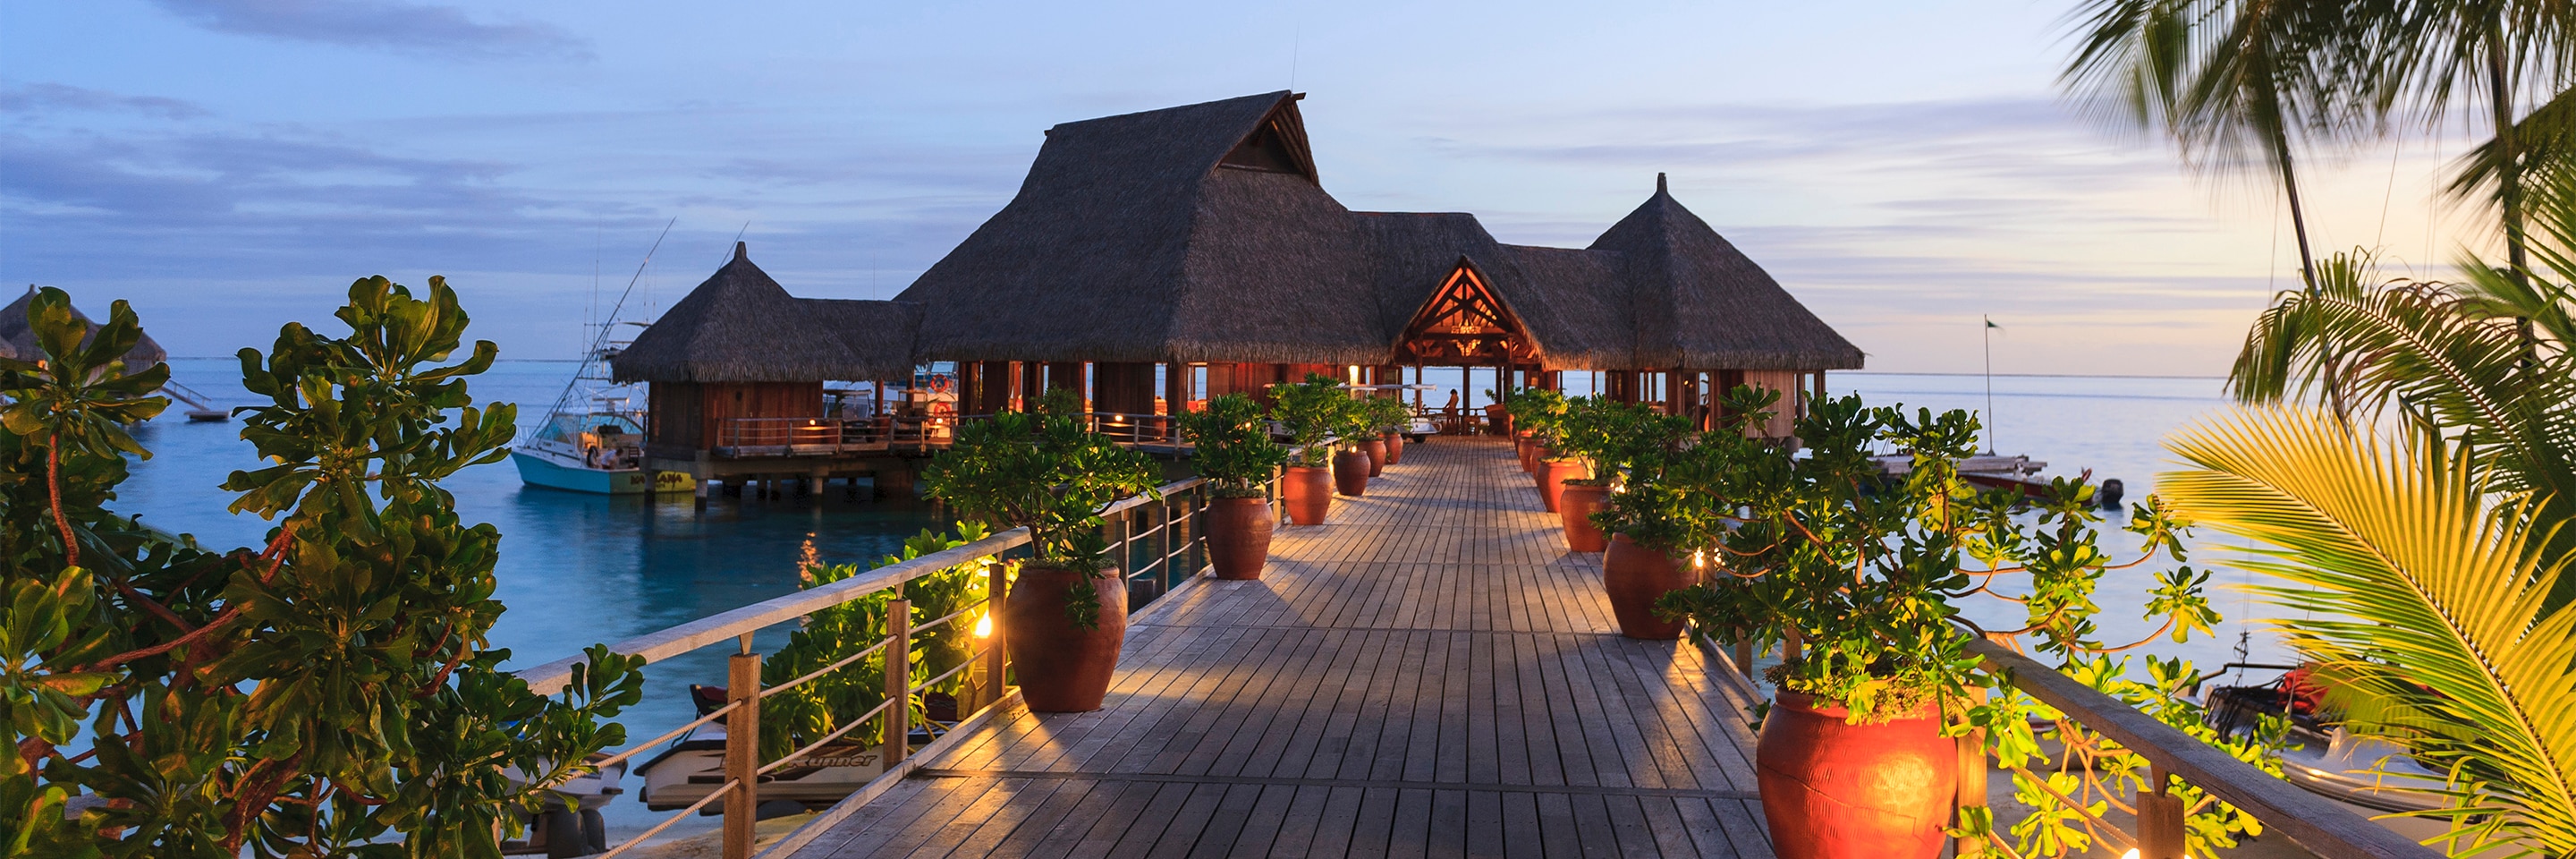 Luxury hotel and restaurant situated on a tropical ocean.